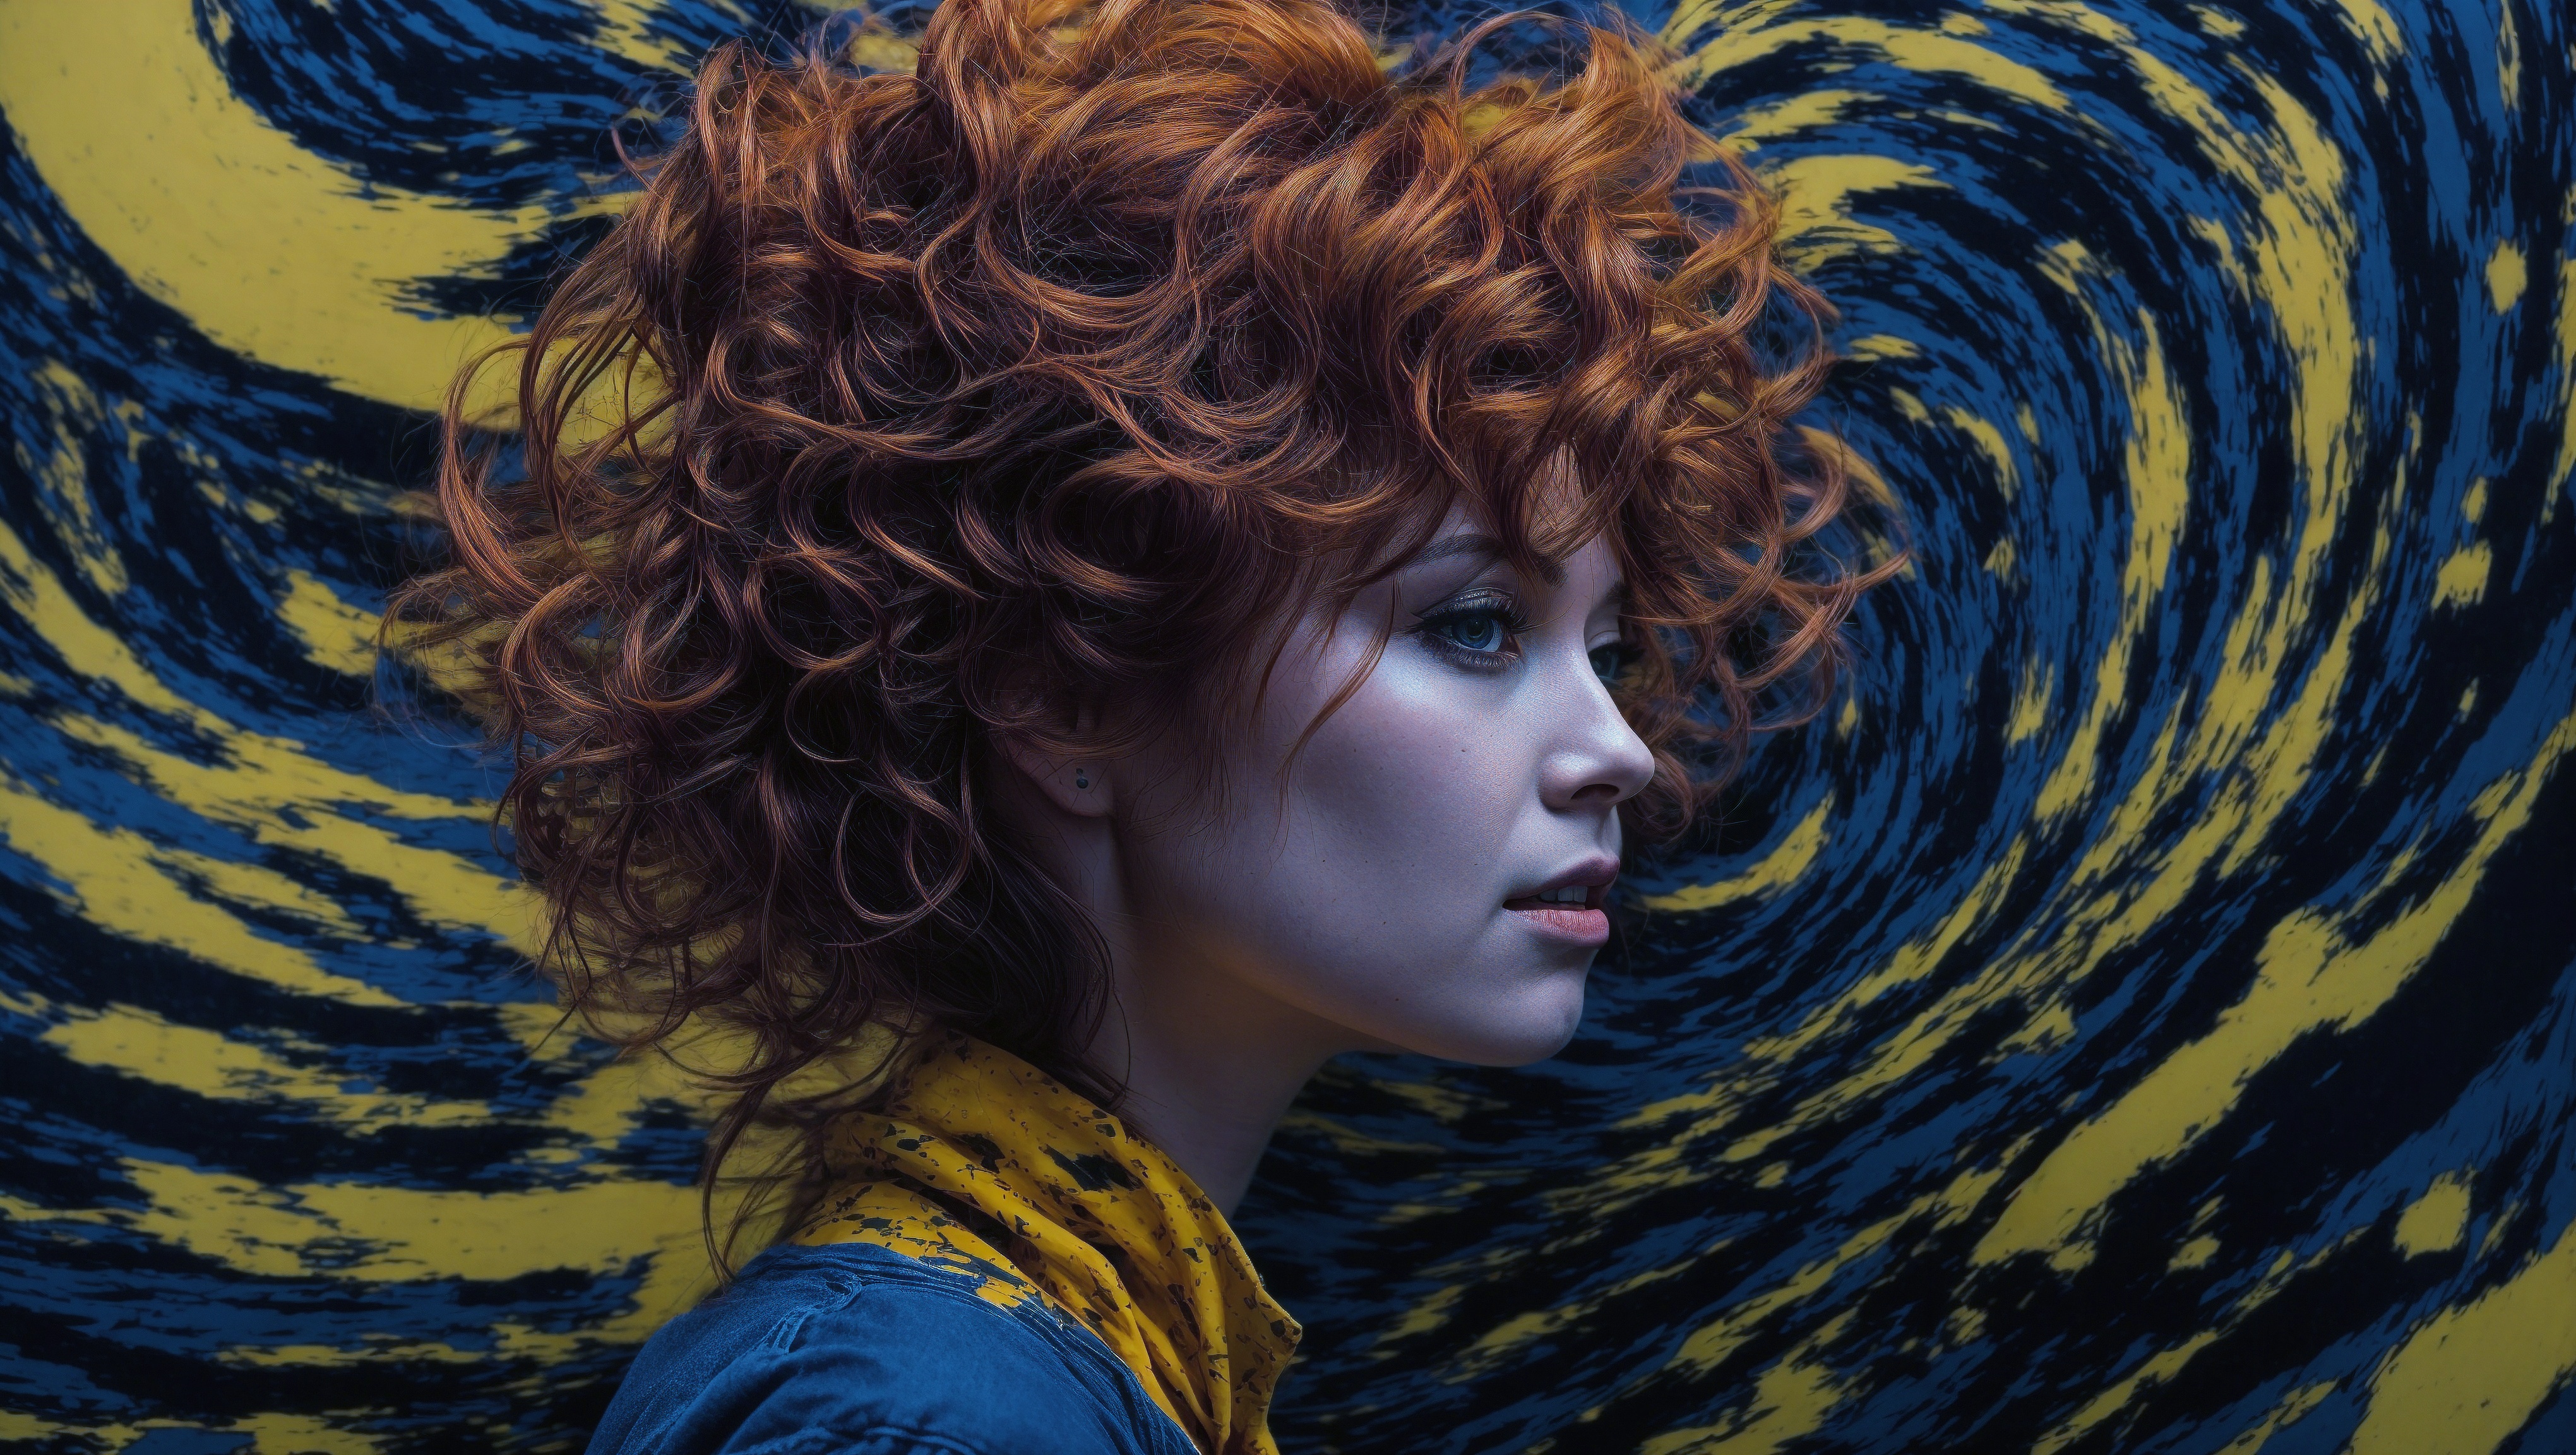 Free photo A woman with bright red curly hair standing in front of yellow and blue swirls